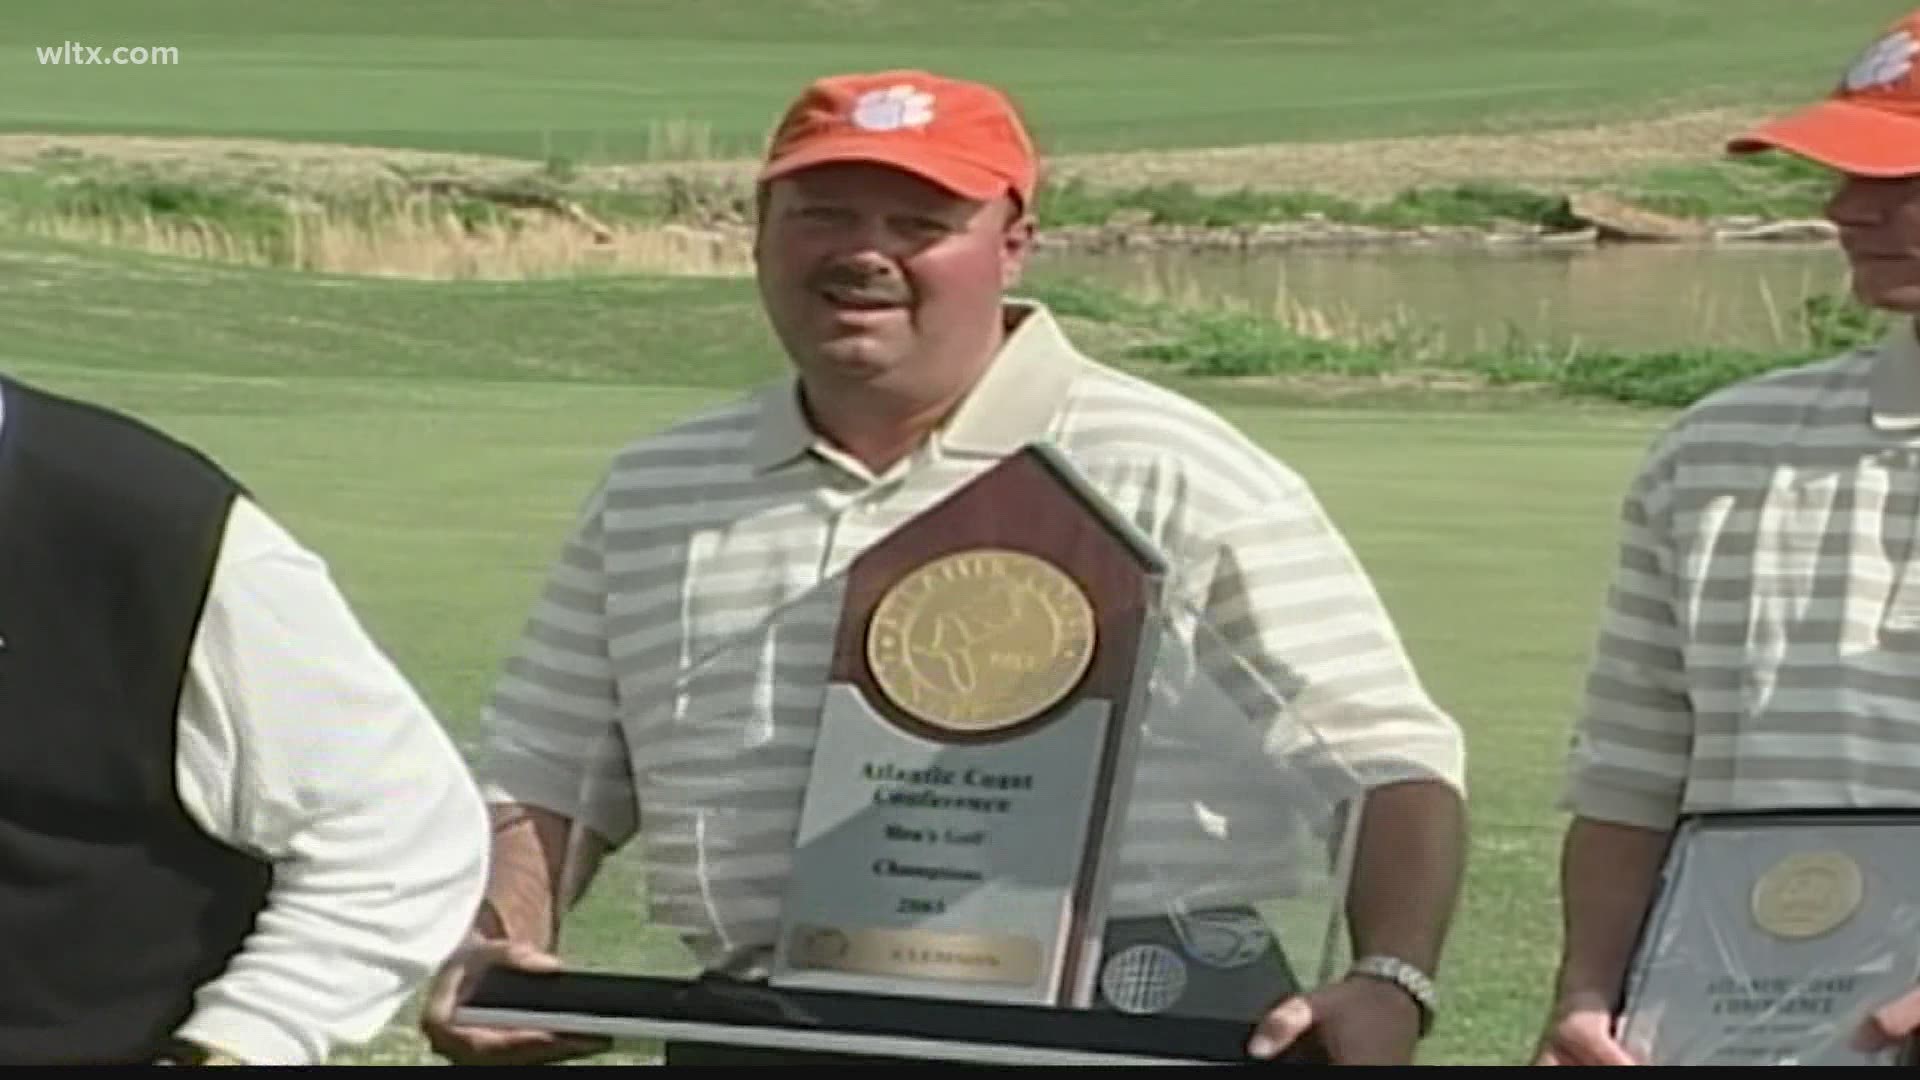 Clemson head men's golf coach Larry Penley will close the book on his coaching career in the coming months.